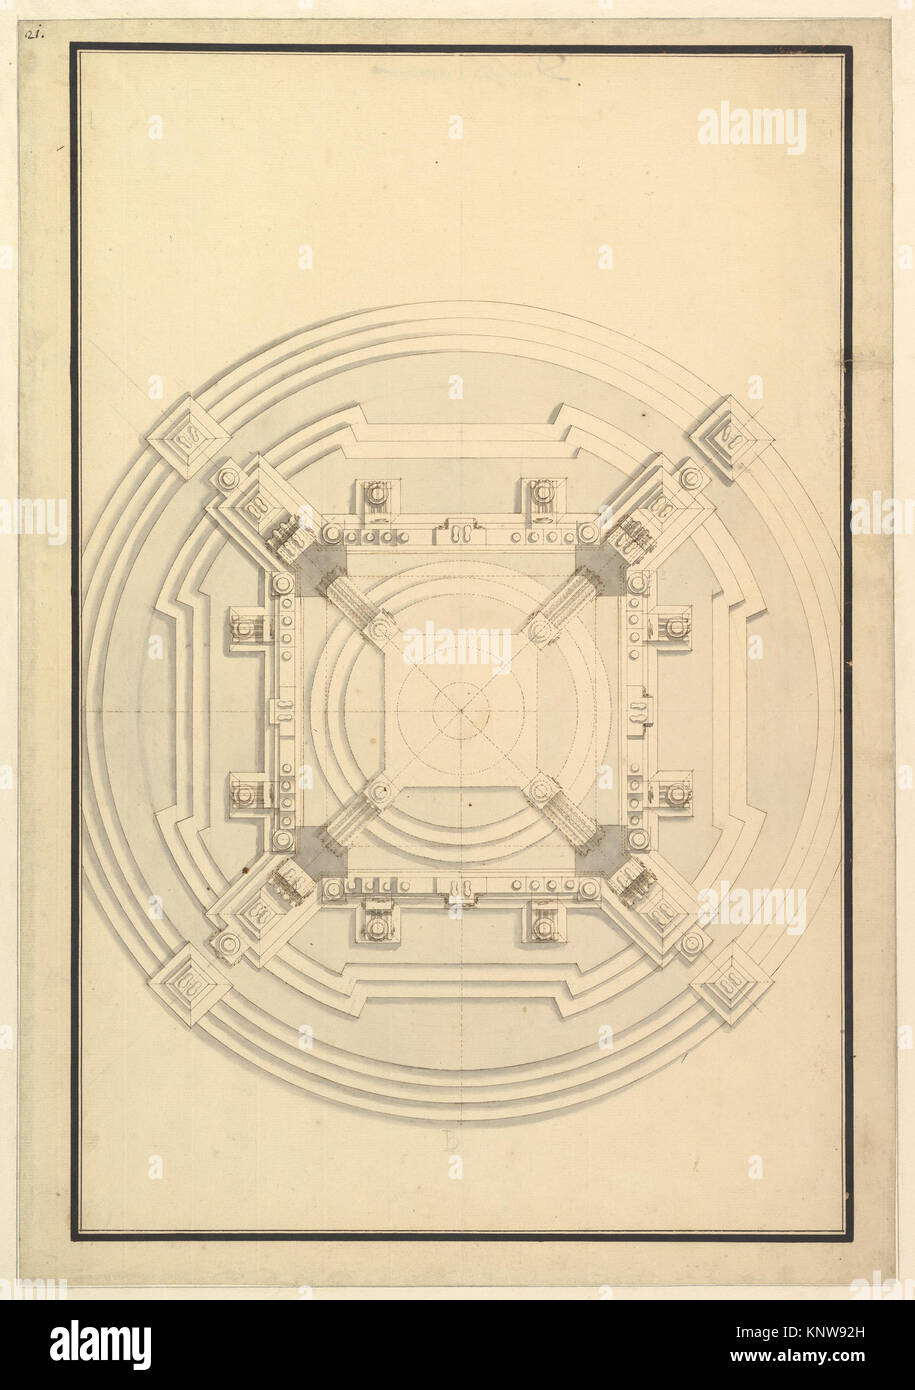 Ground Plan for a Catafalque for a Duchess of Hanover, probably Sophia (1630-1714) the mother of George I of England MET DP820103 344383 Stock Photo